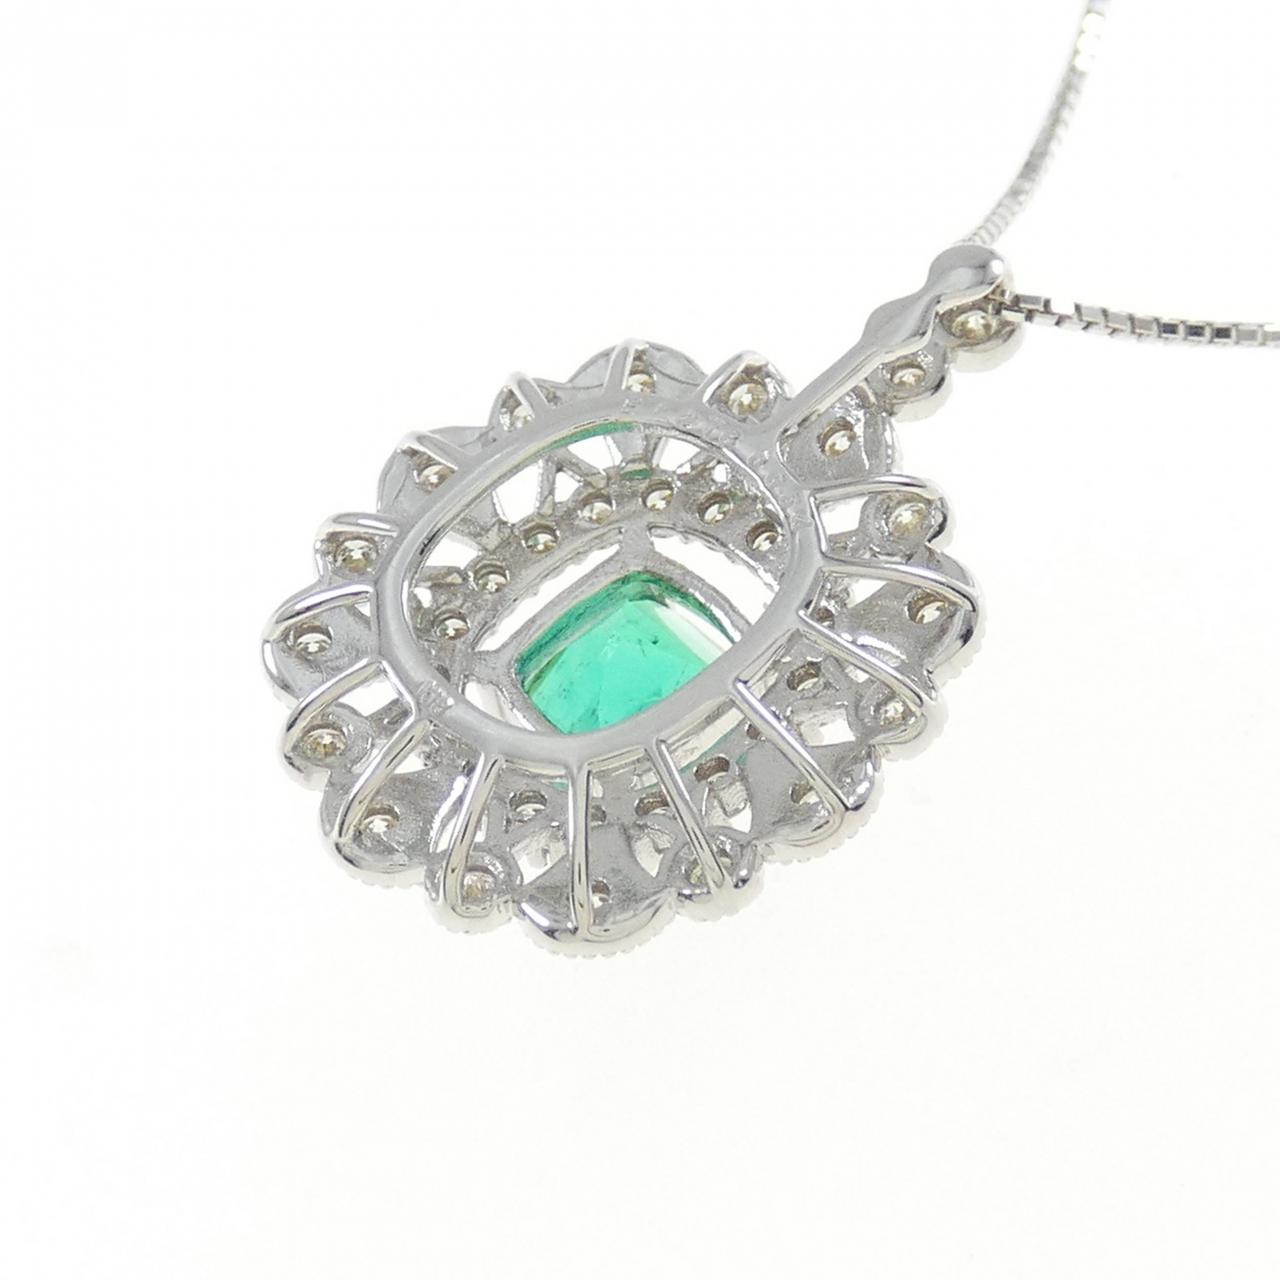 K18WG emerald necklace 1.278CT Colombian